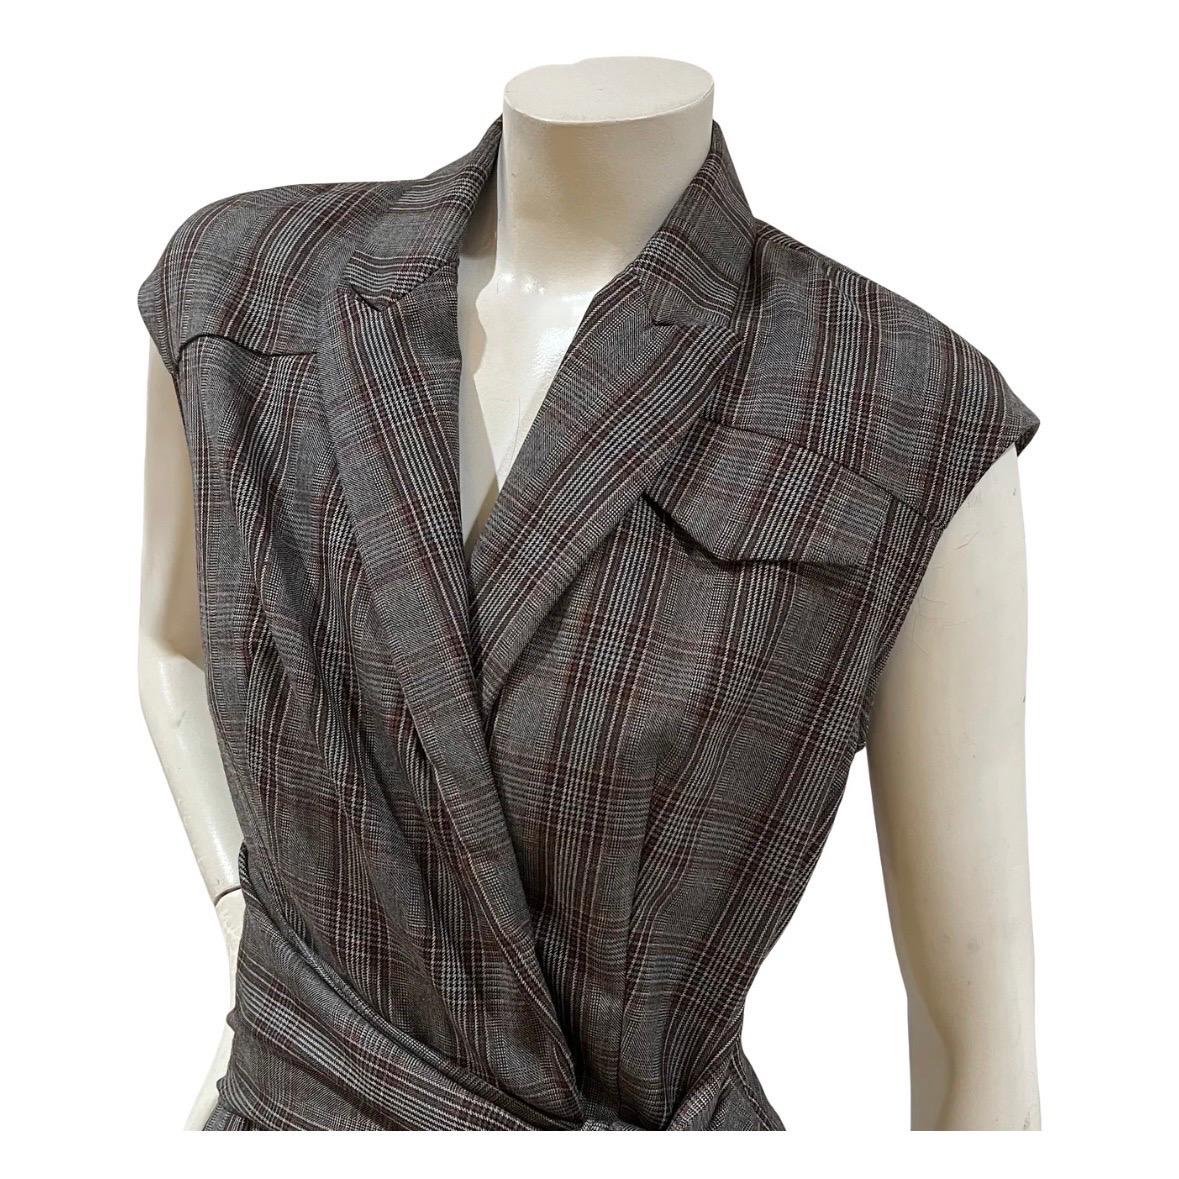 Vintage Plaid Jumpsuit by Brunello Cucinelli
Made in Italy
Dark gray and red plaid throughout 
Sleeveless
Collared 
Faux bust pocket 
Front snap closure to waist 
Side zipper closure
Attached waist tie
Dual side pant pockets
Dual back pant pockets 